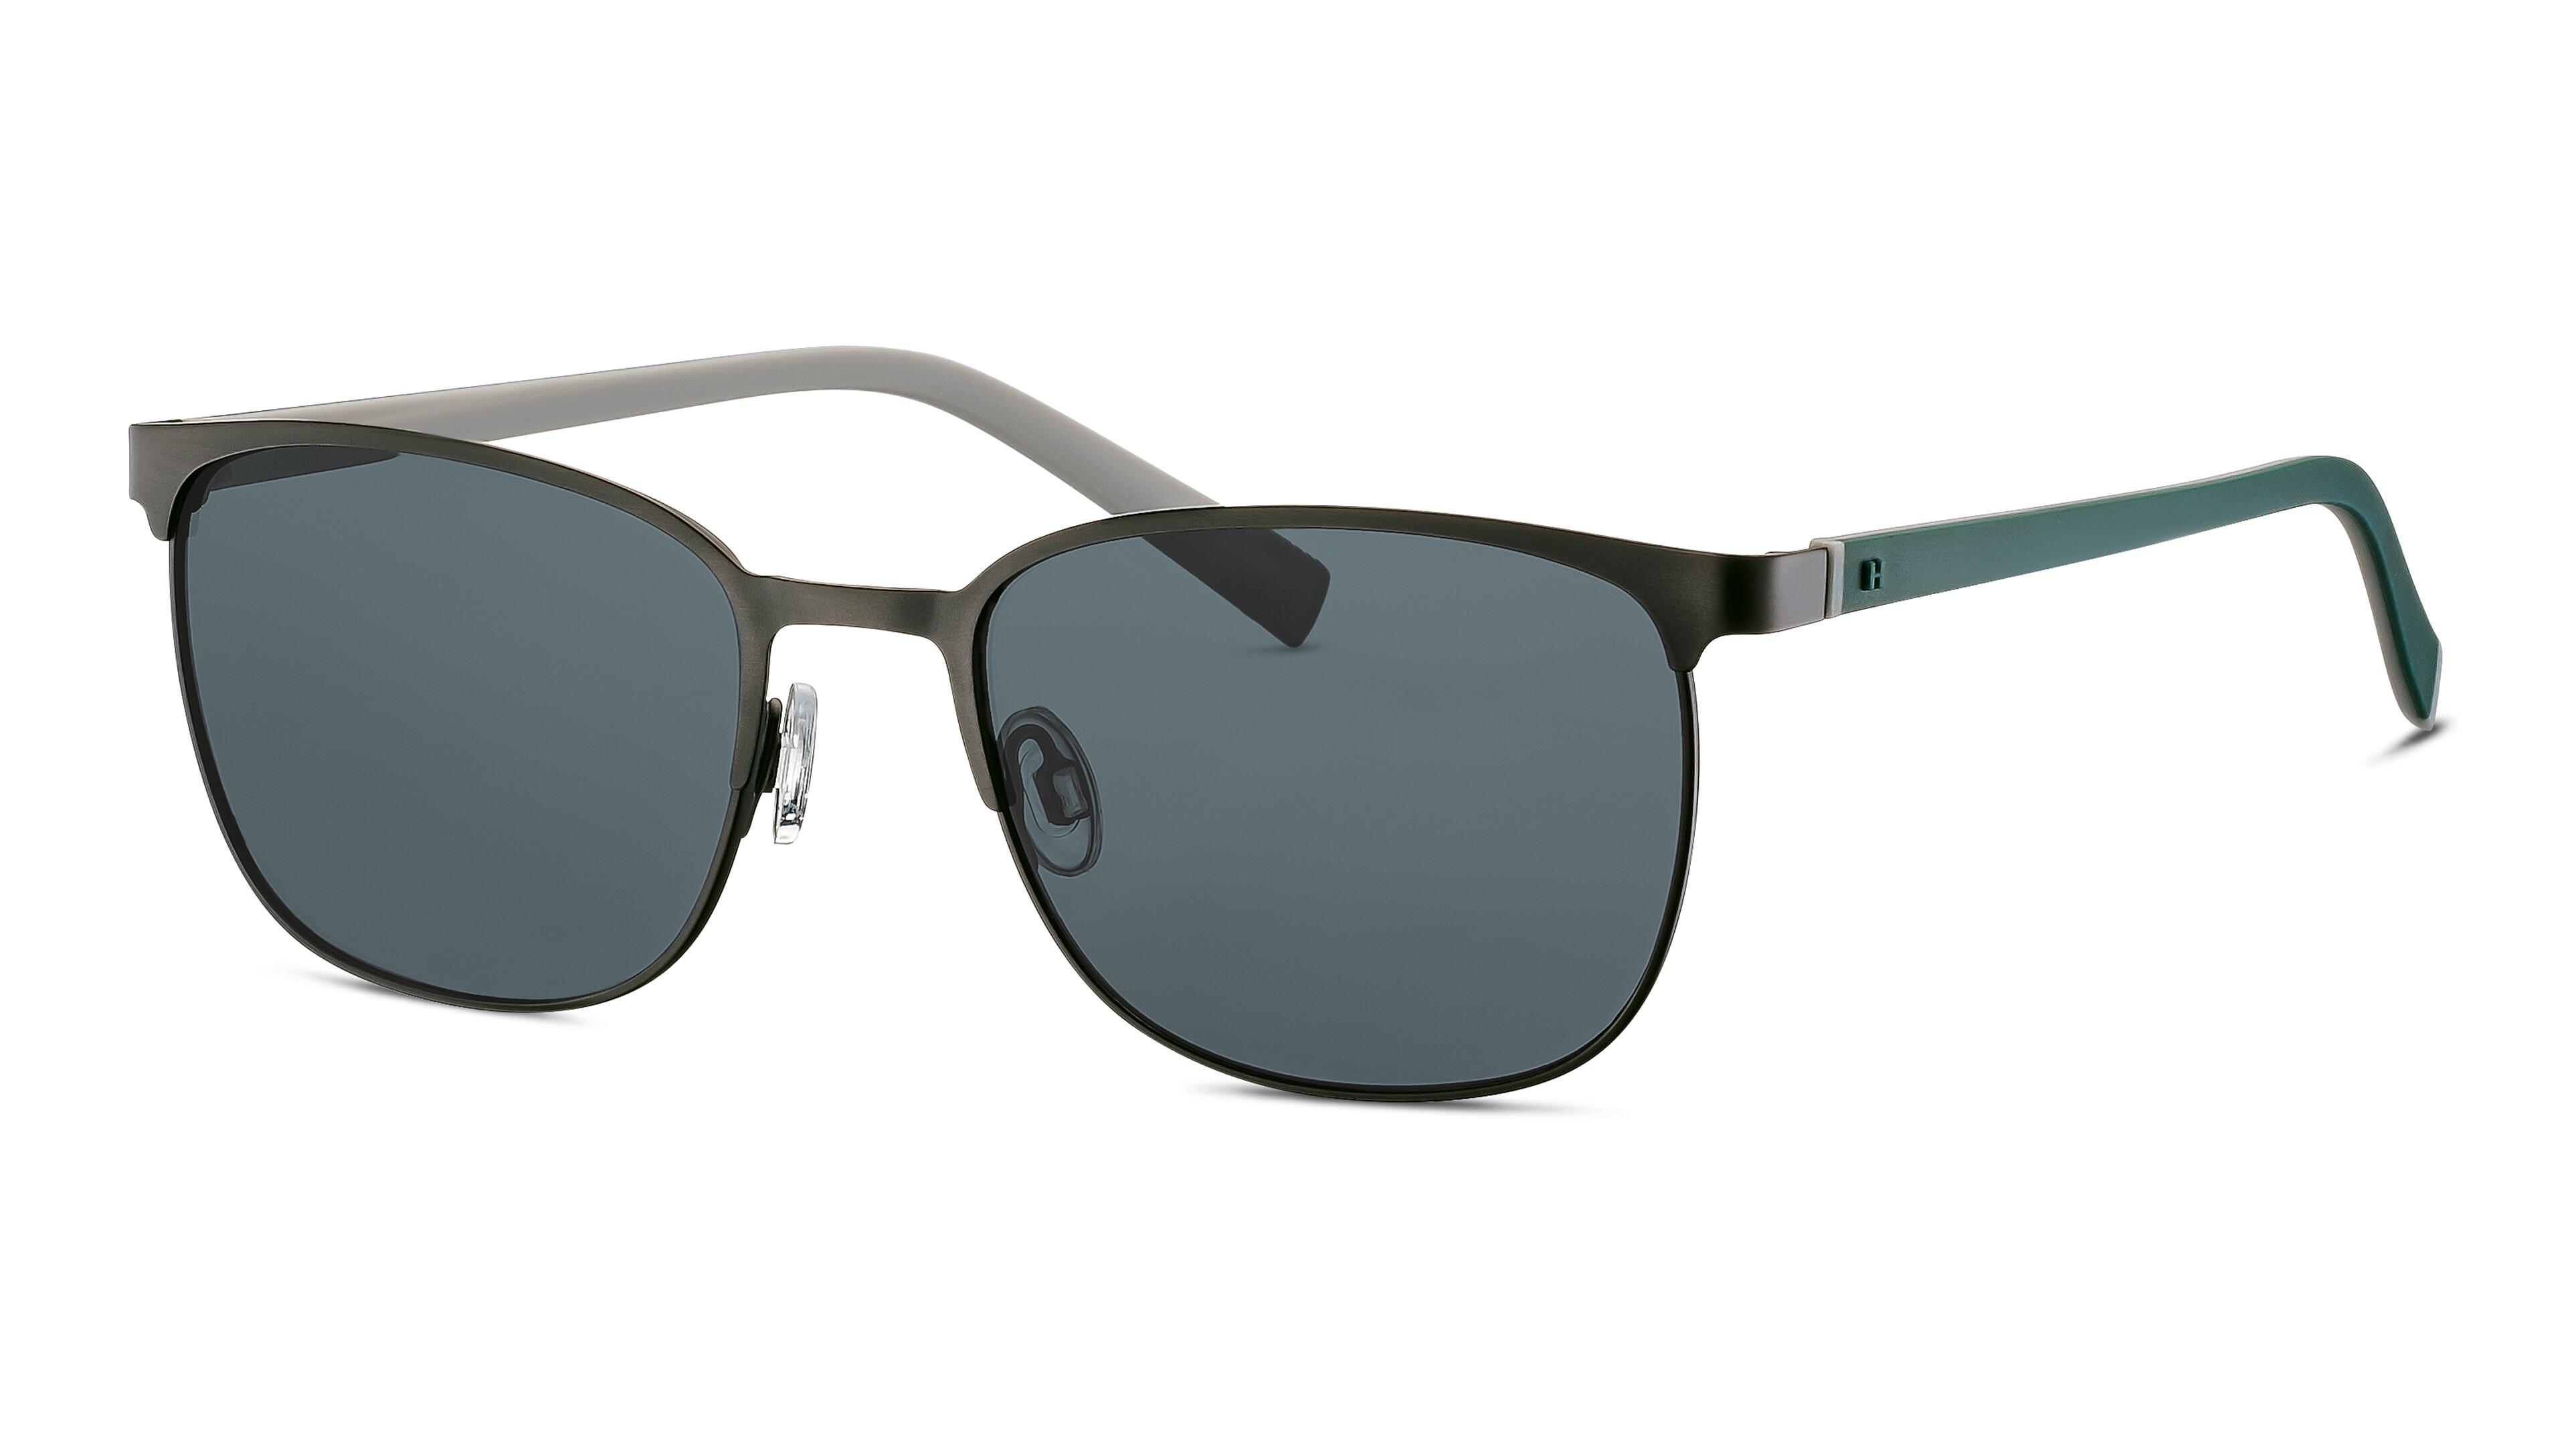 [products.image.front] HUMPHREY´S eyewear 586111 301130 Sonnenbrille